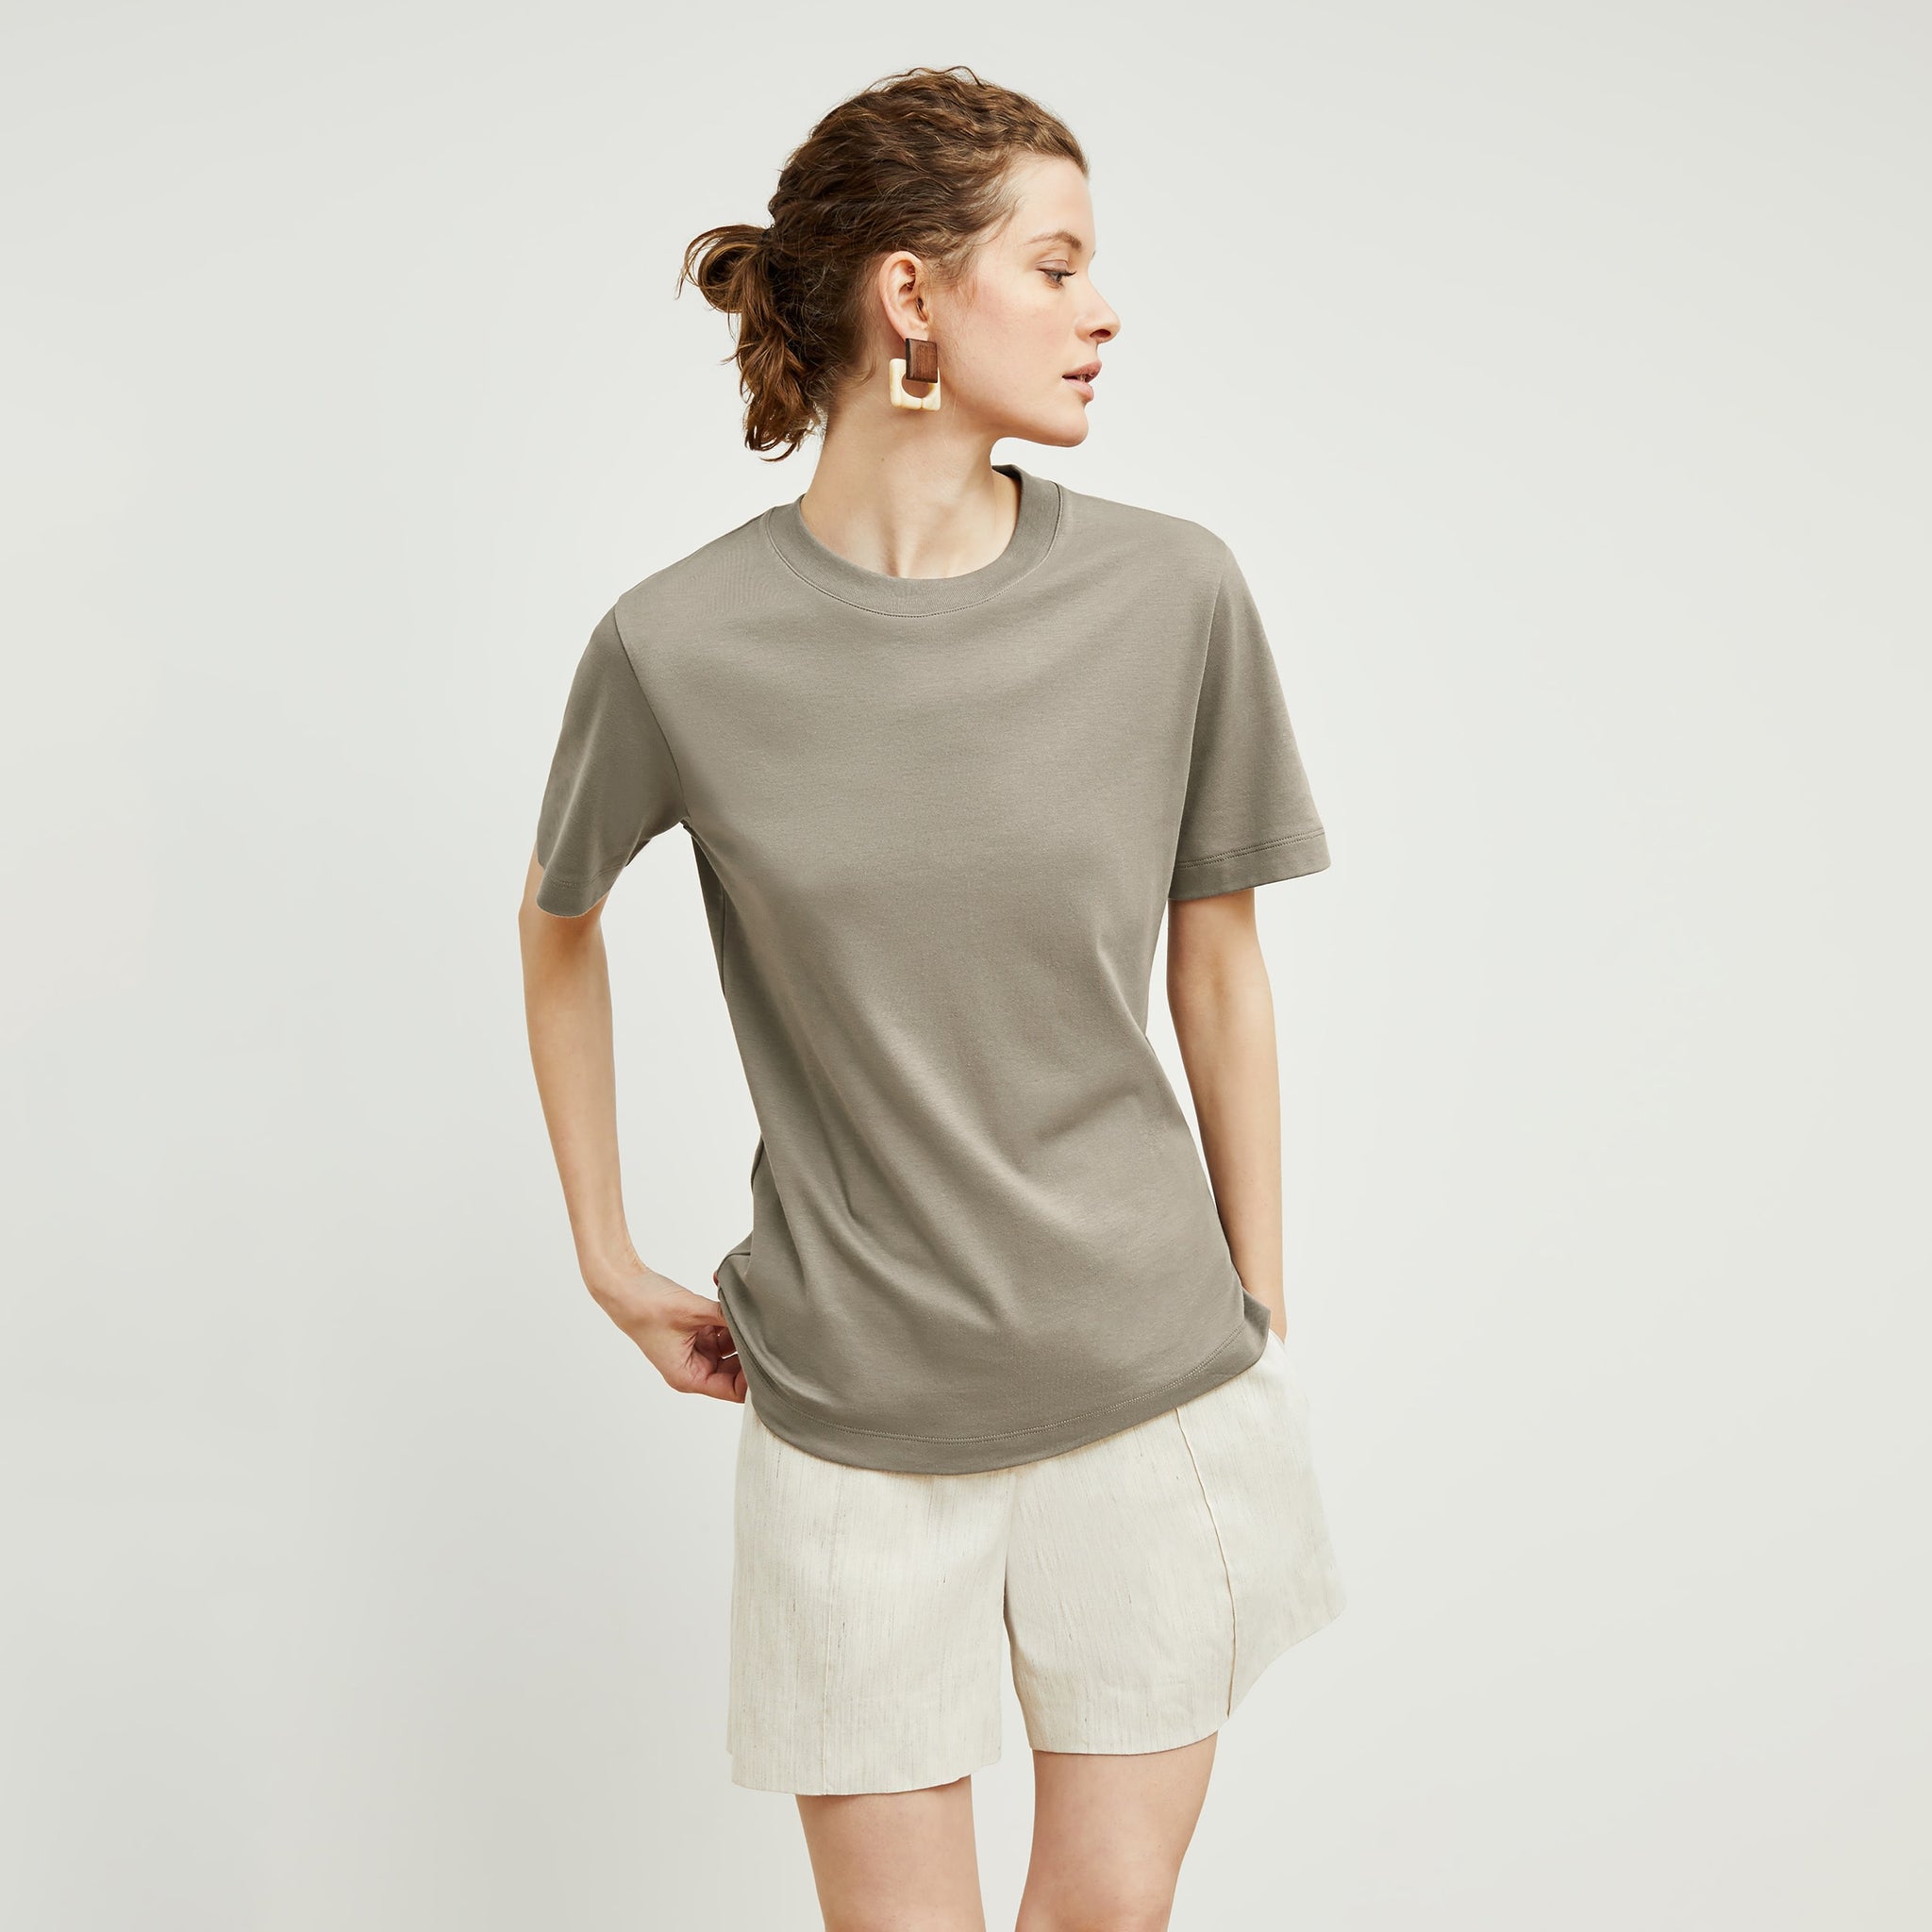 Front image of a woman standing wearing the Leslie T-Shirt—Compact Cotton in Pebble